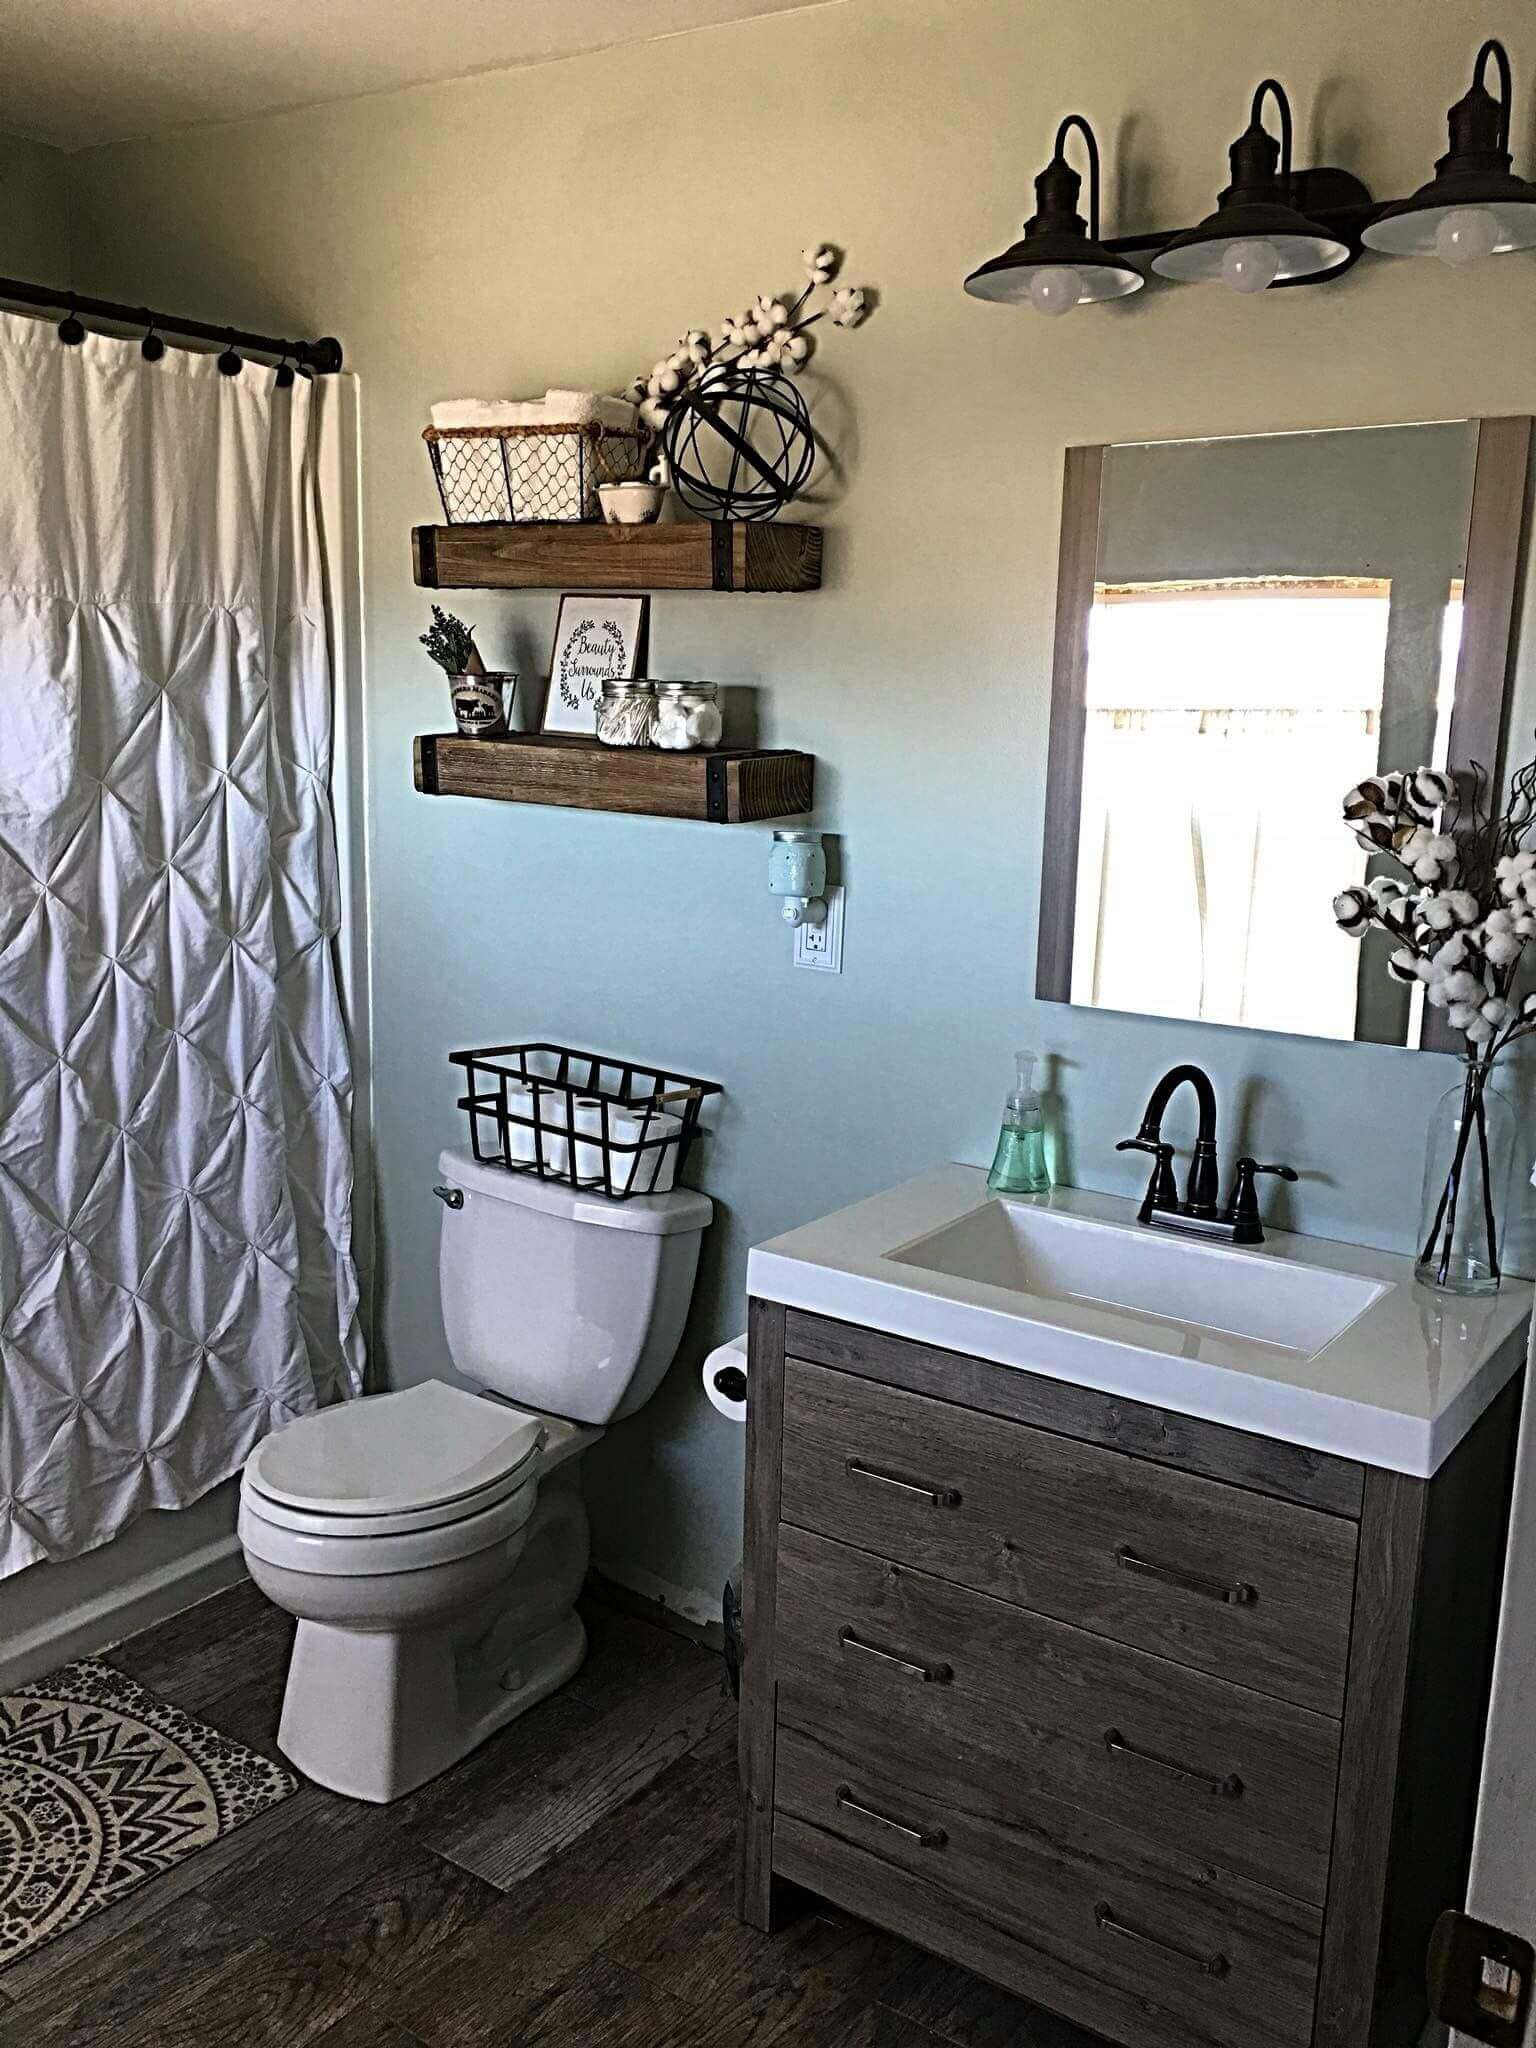 Guest Bathroom Decor Ideas
 29 Small Guest Bathroom Ideas to ‘Wow’ Your Visitors